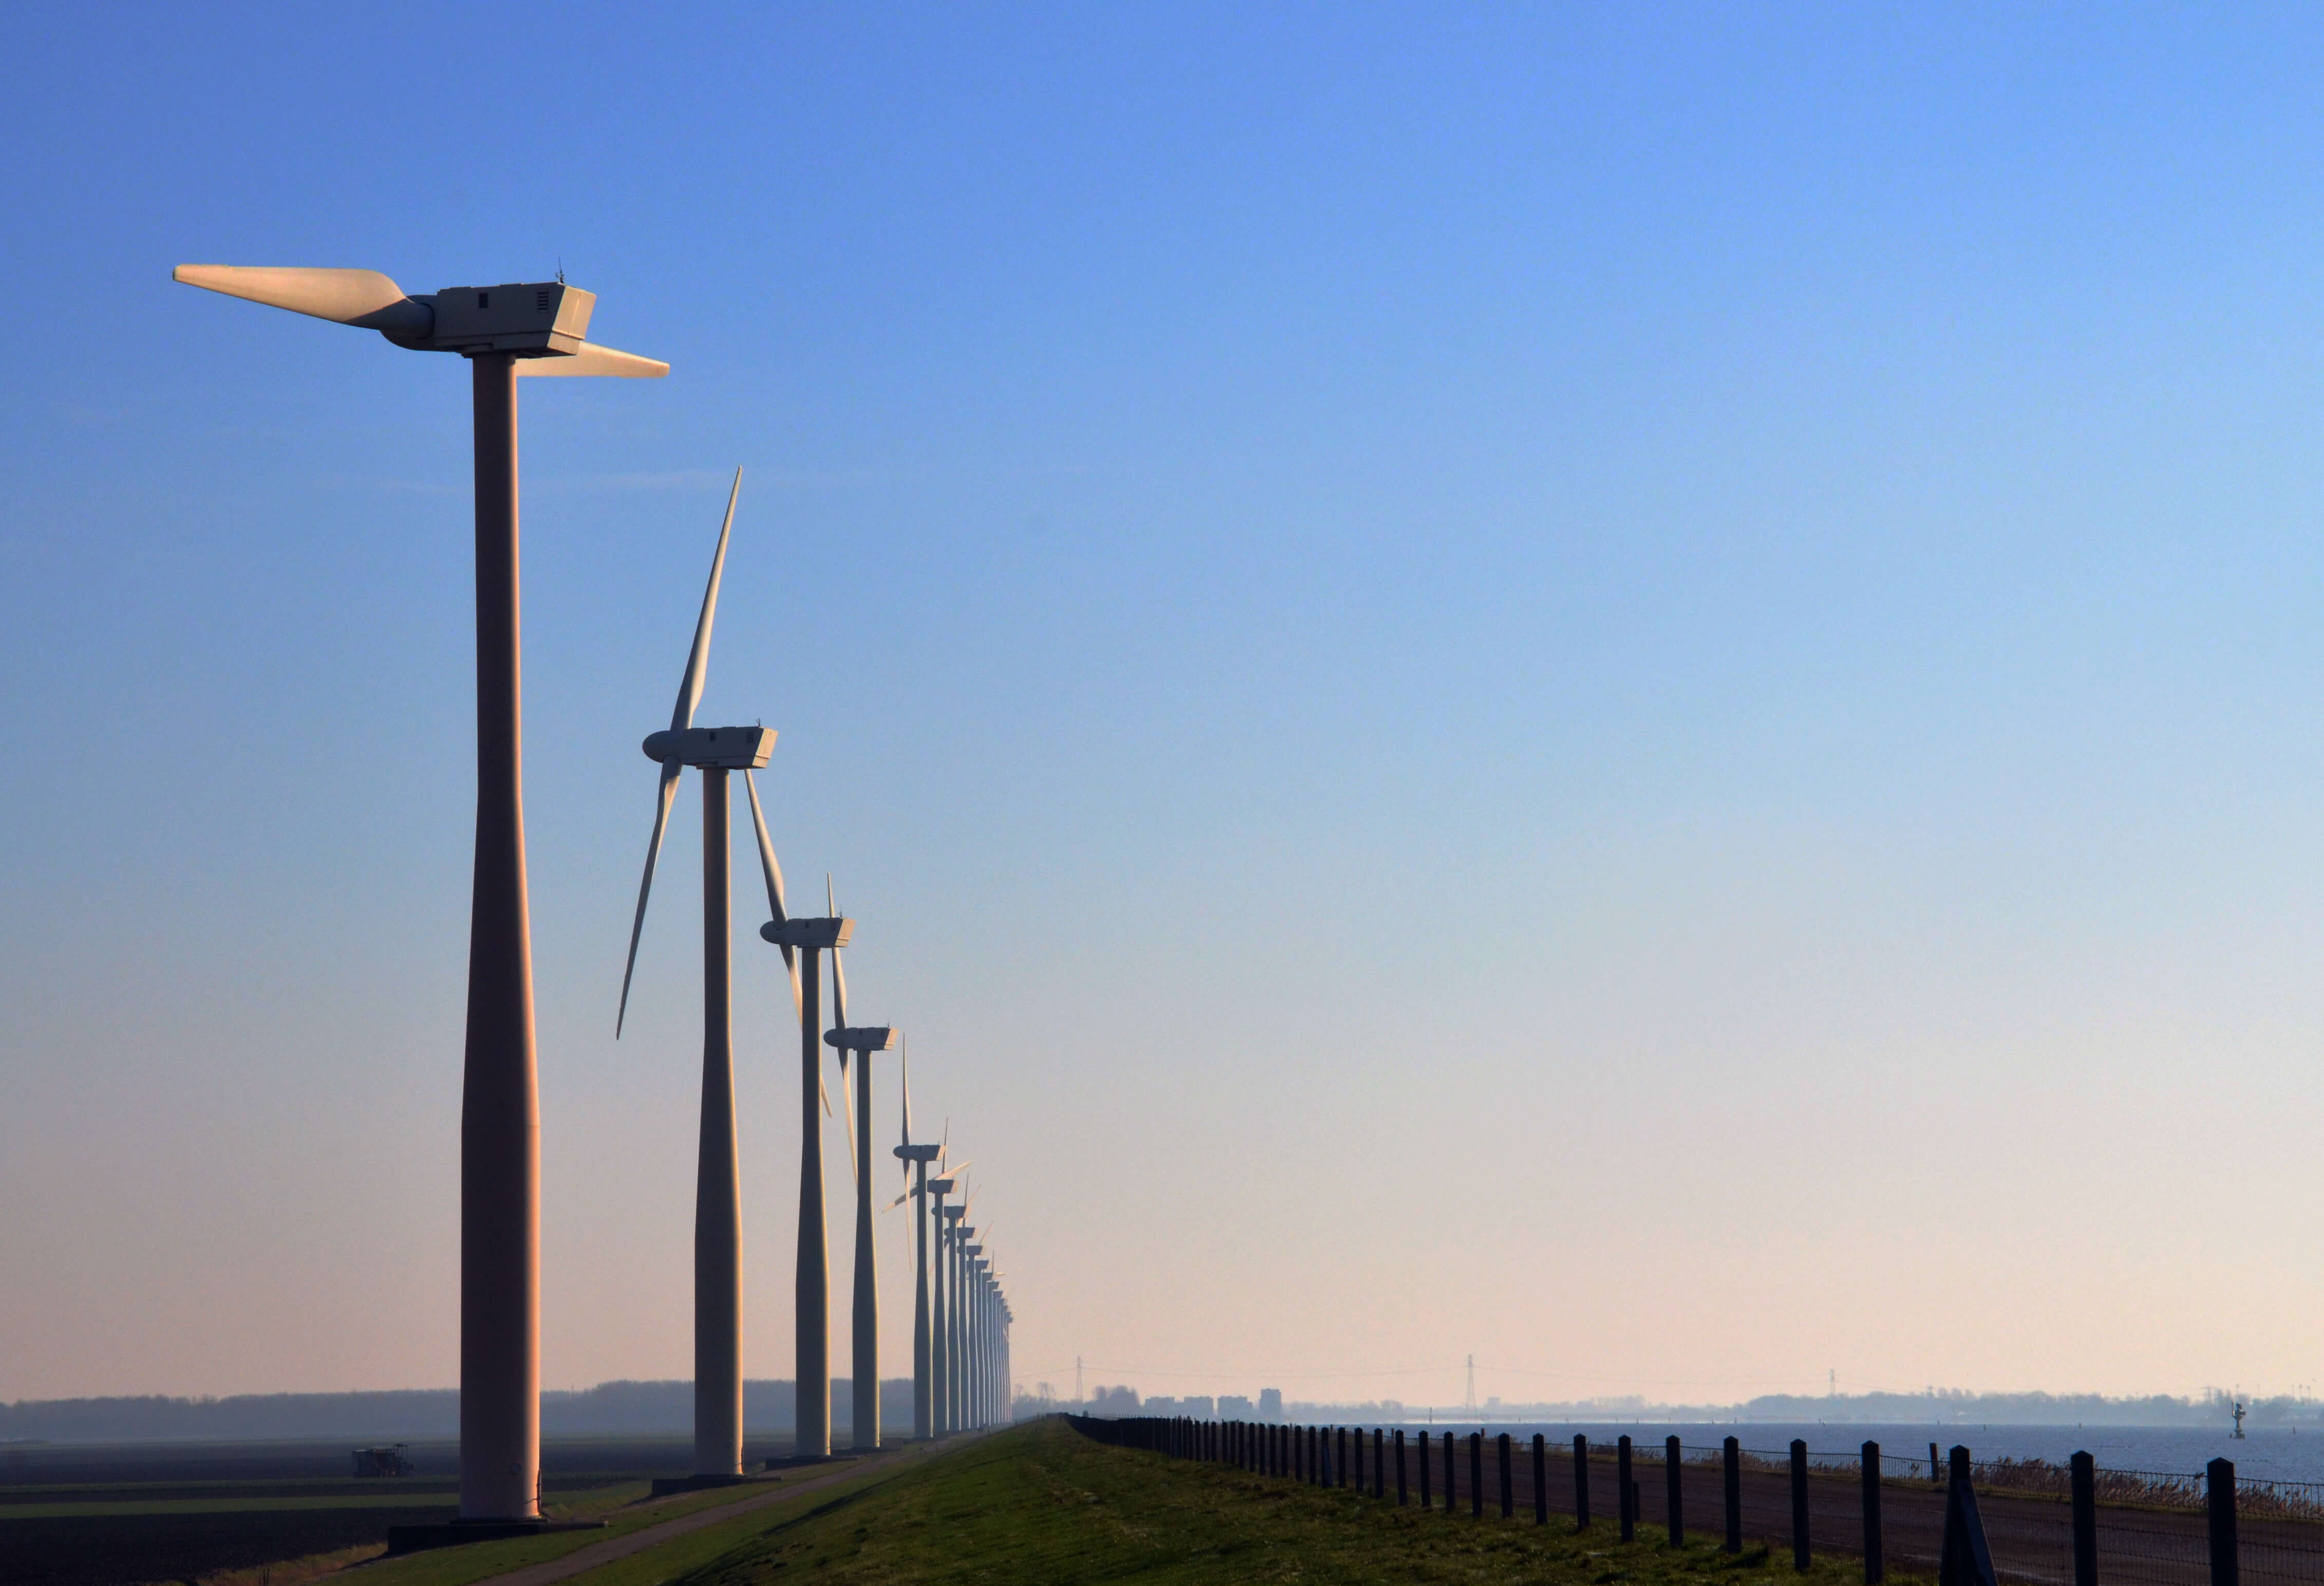 "The Dutch INEC seems rather weak on this point, indicating only that the energy efficiency and renewables shares are likely to increase as a side-effect of policies focusing on cost-effective emission reductions." © Floris Oosterveld / Flickr